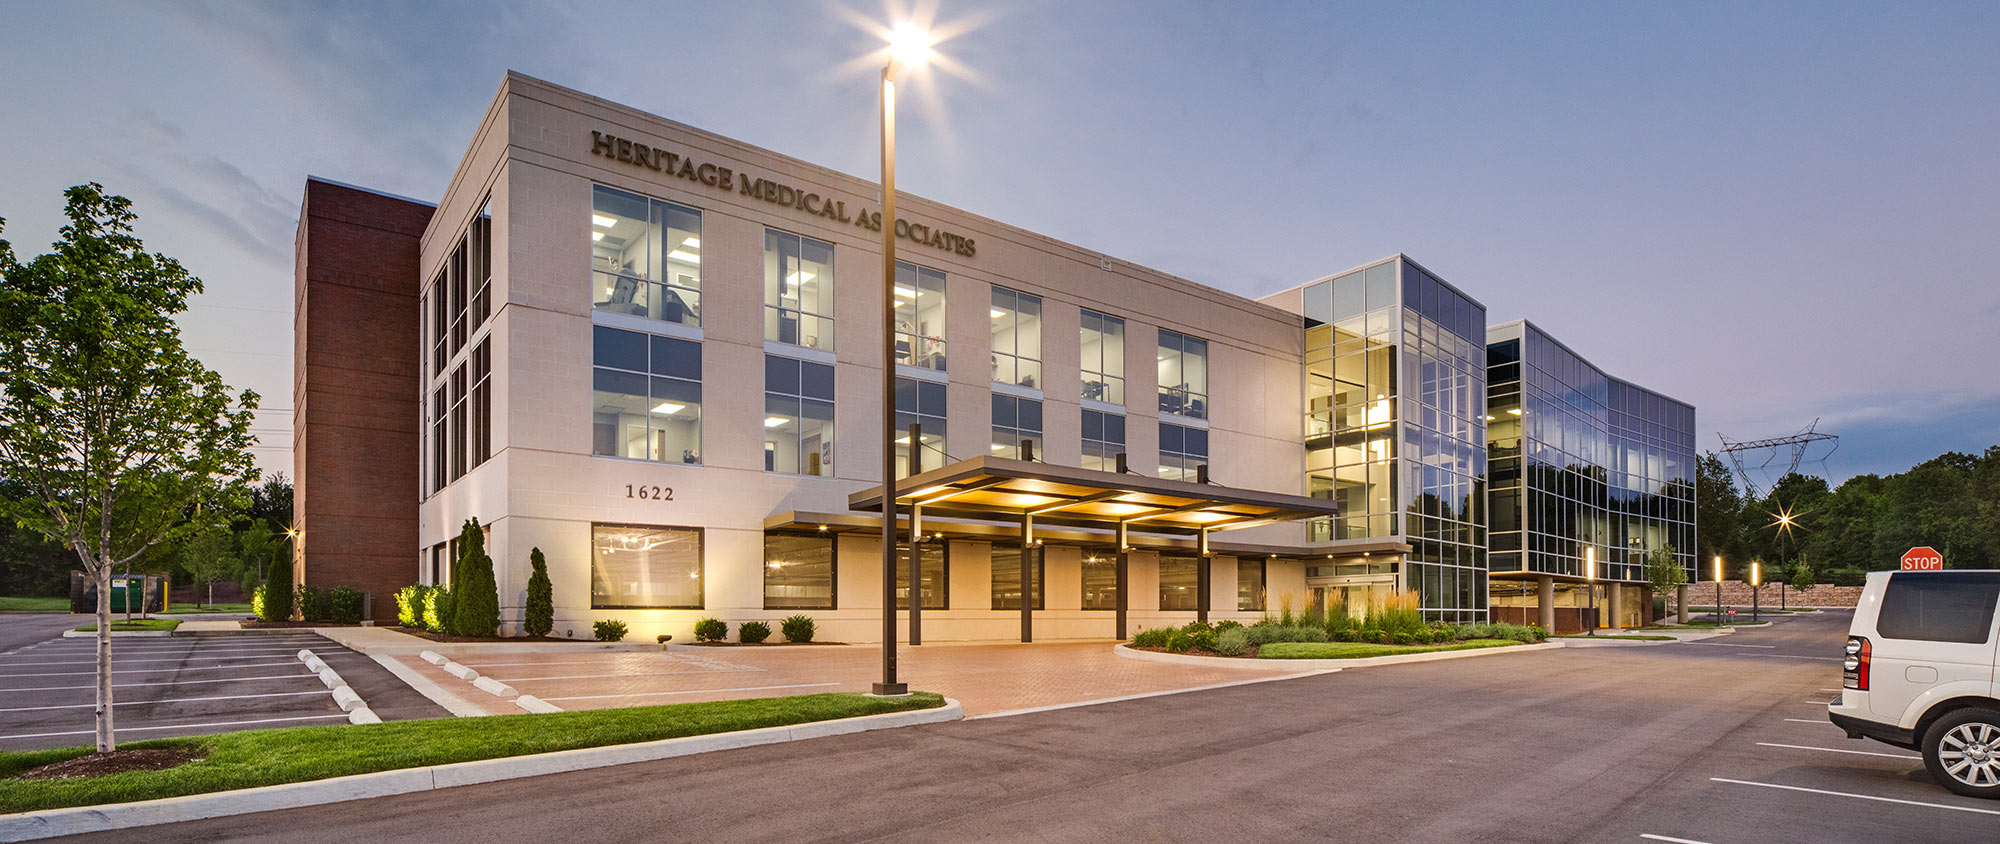 Heritage Medical Associates, Medical Office Building + Clinic